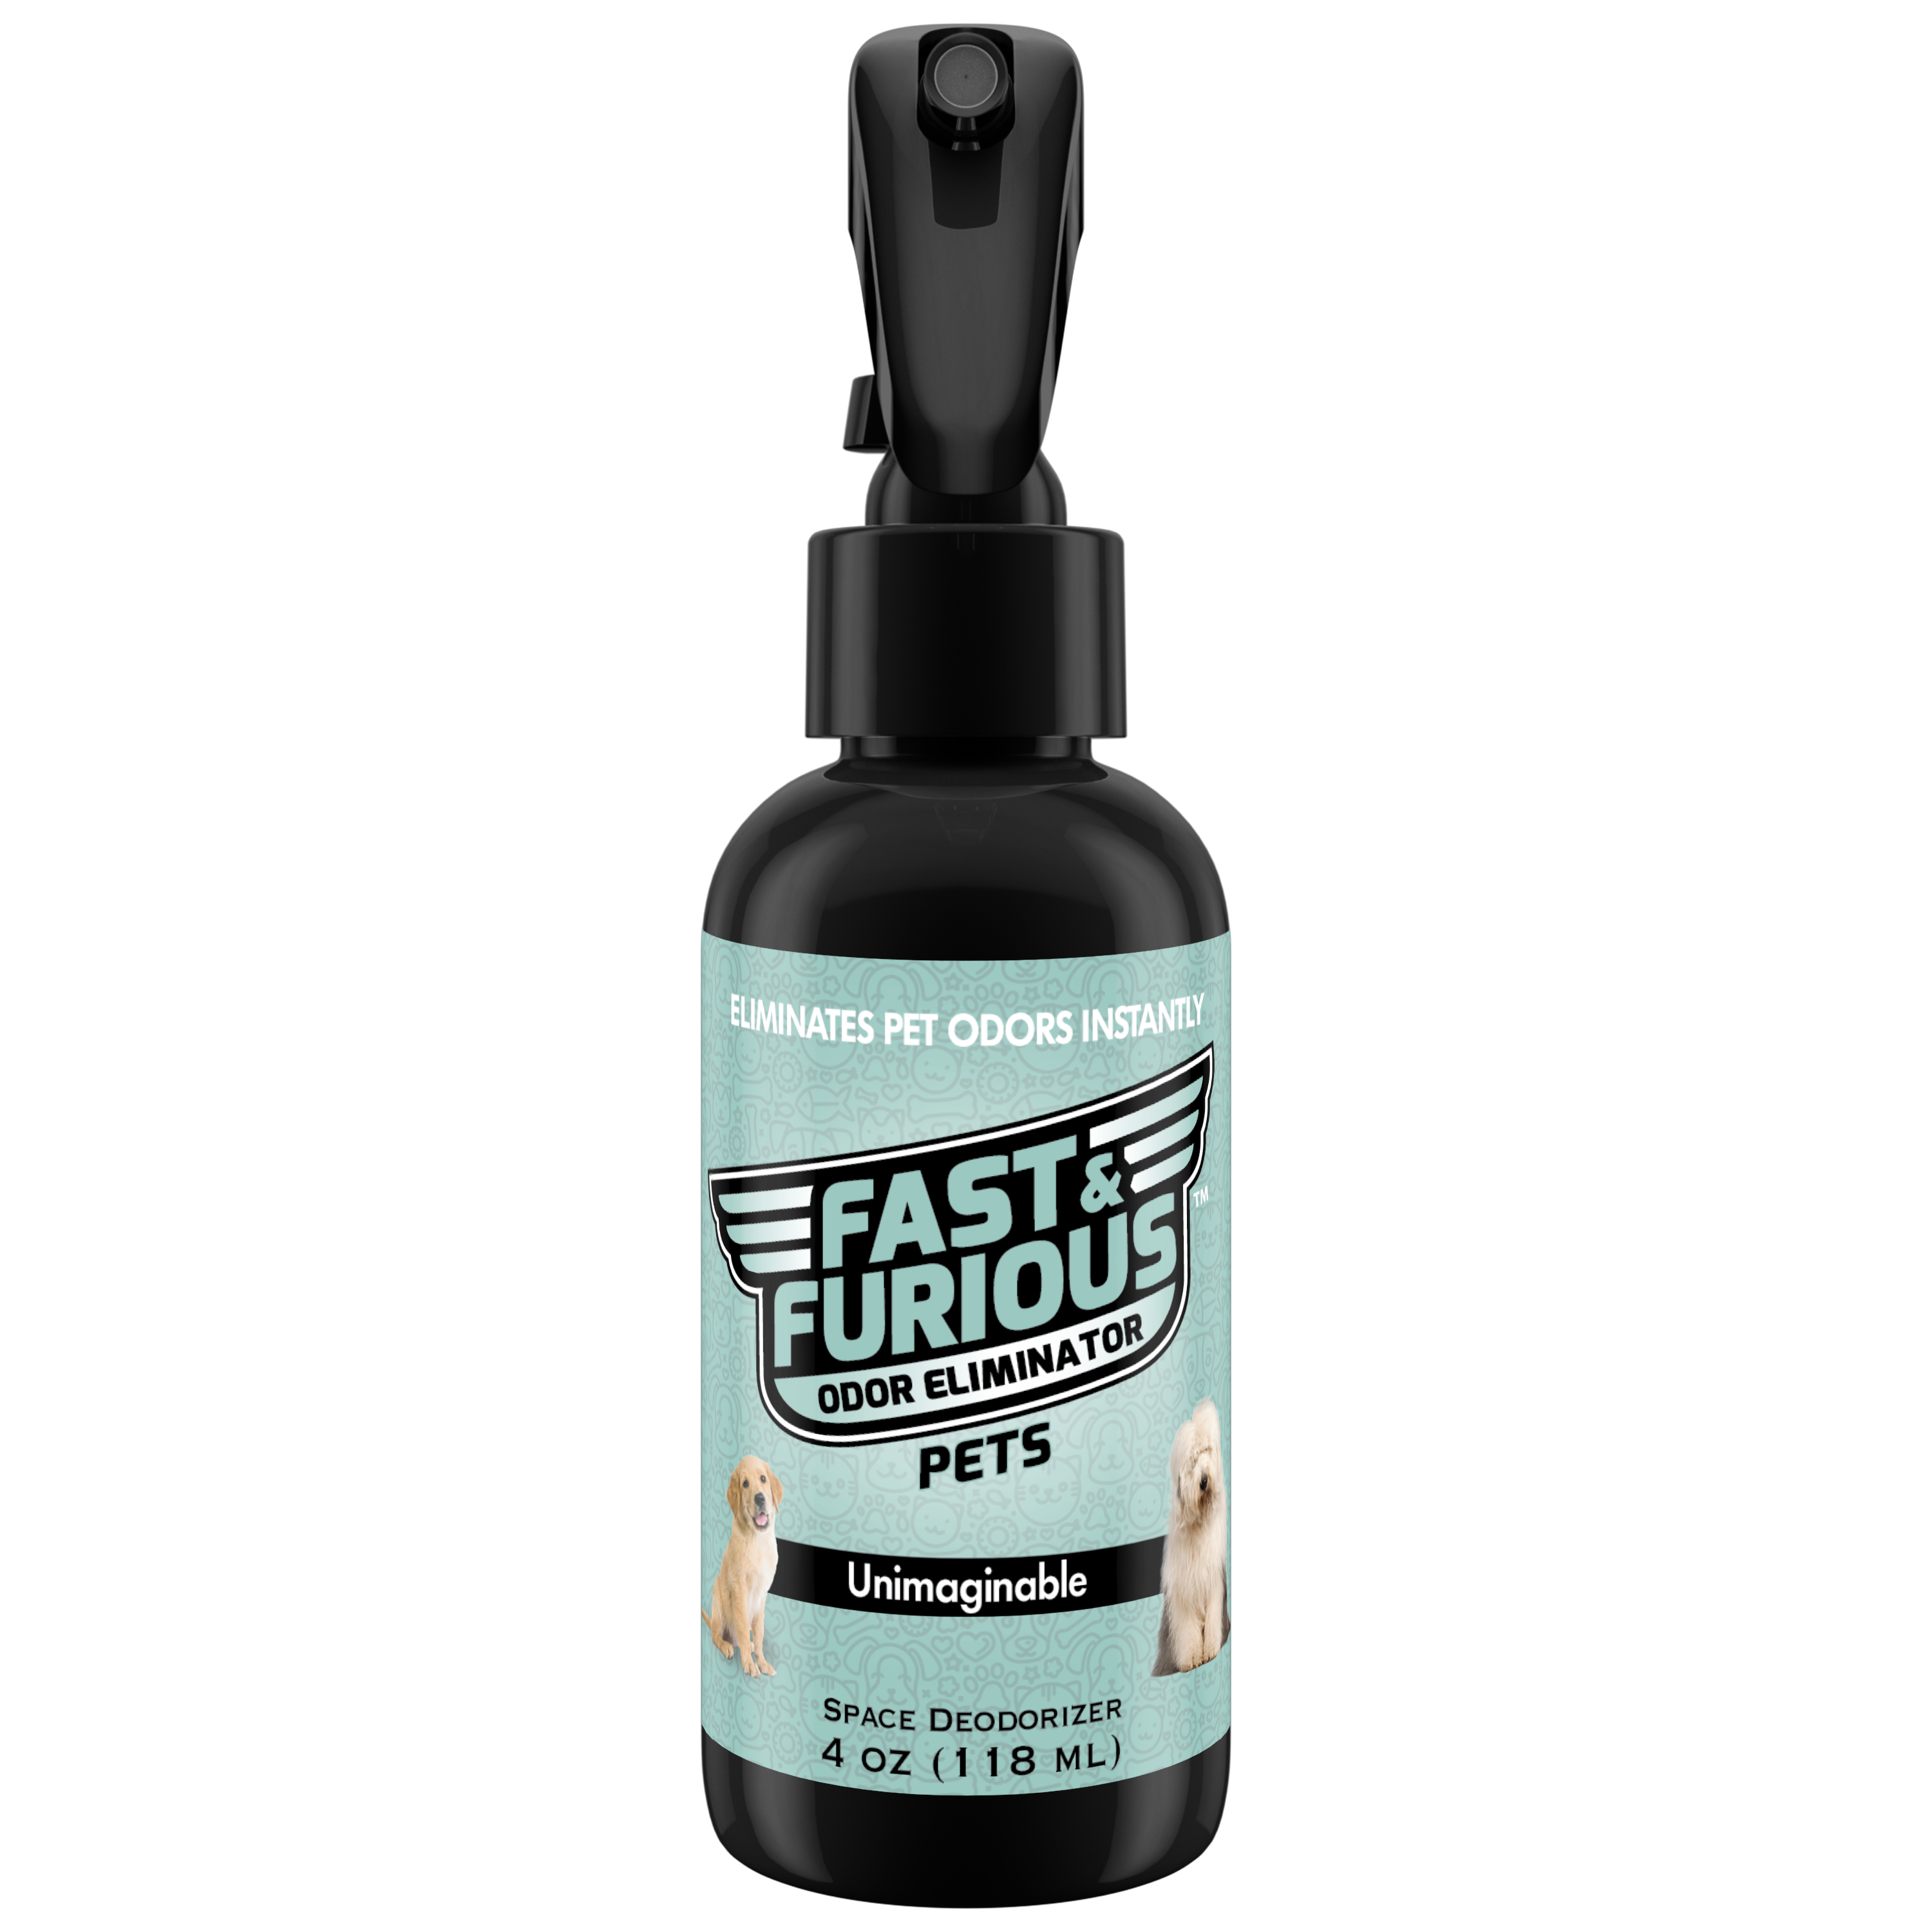 Fast and Furious Pets Odor Eliminator - Unimaginable Scent